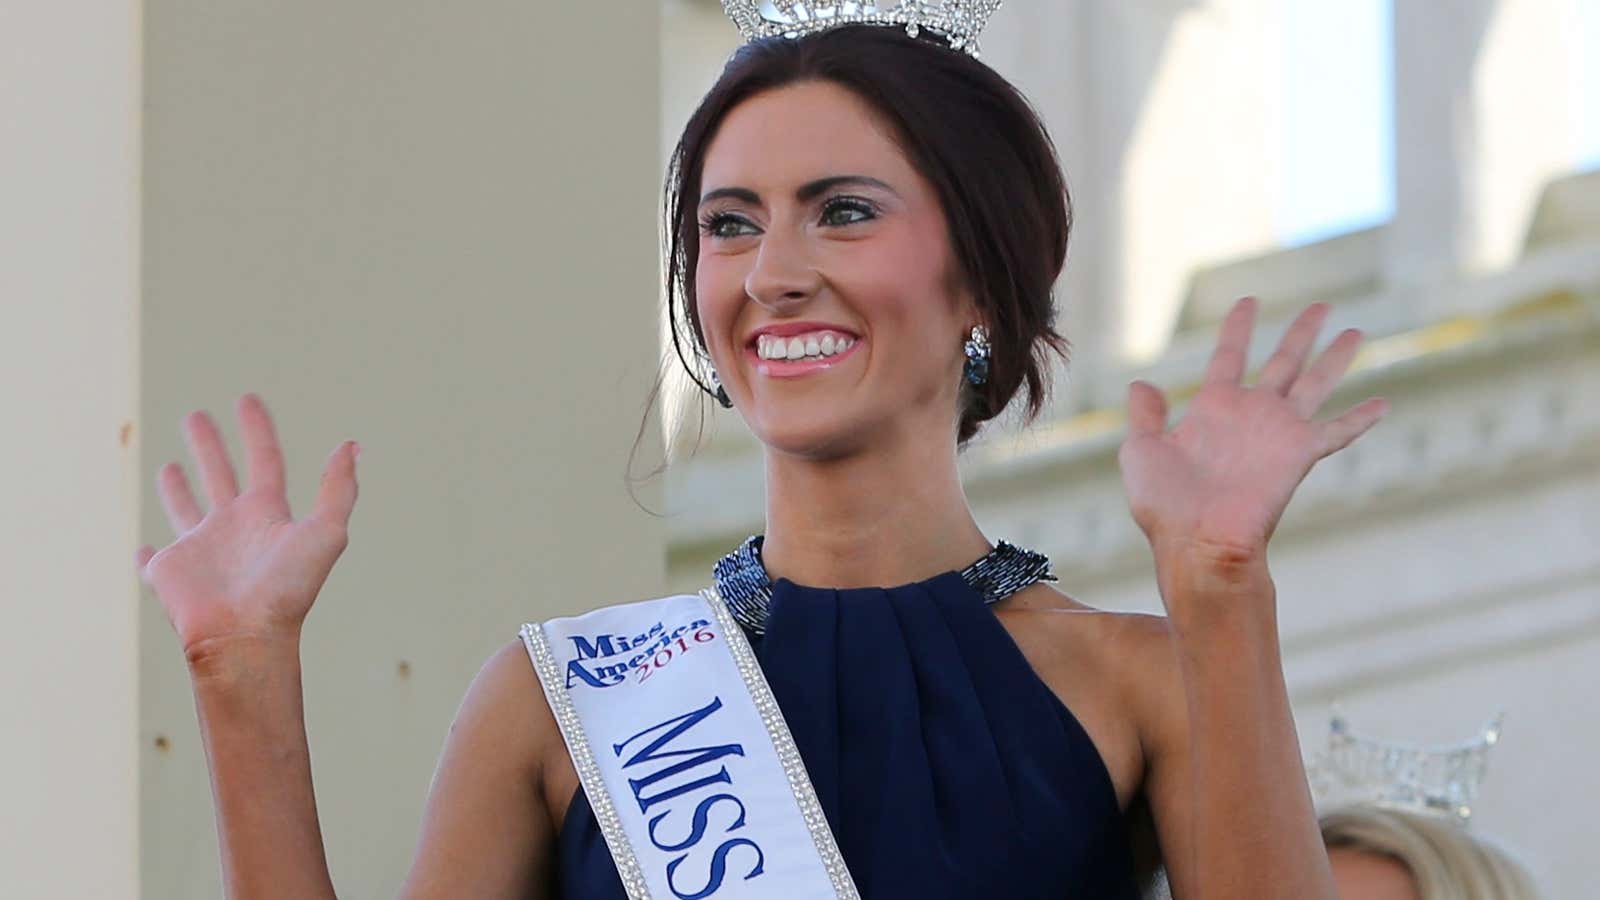 Miss Missouri, Erin O’ Flaherty, will compete for the Miss America crown on Sept. 11, as the first openly lesbian contestant. (AP Photo/Mel Evans, File)